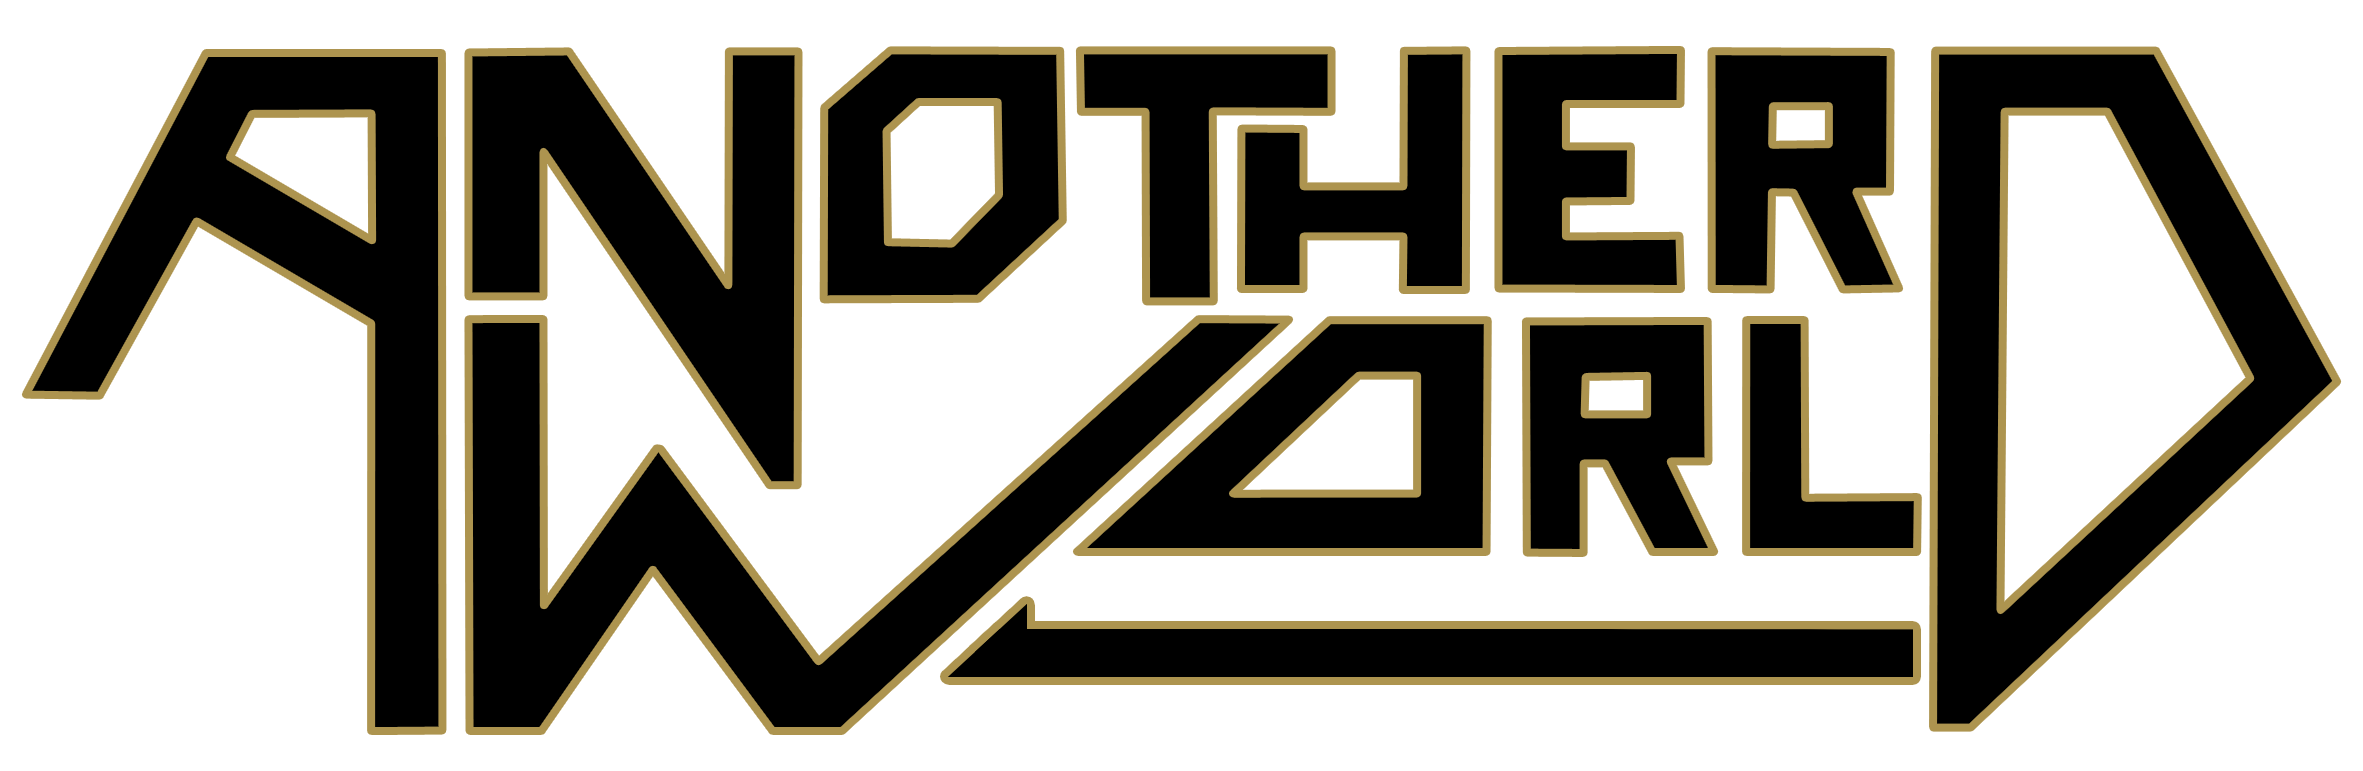 Another World - Logo 1 [logo.png]